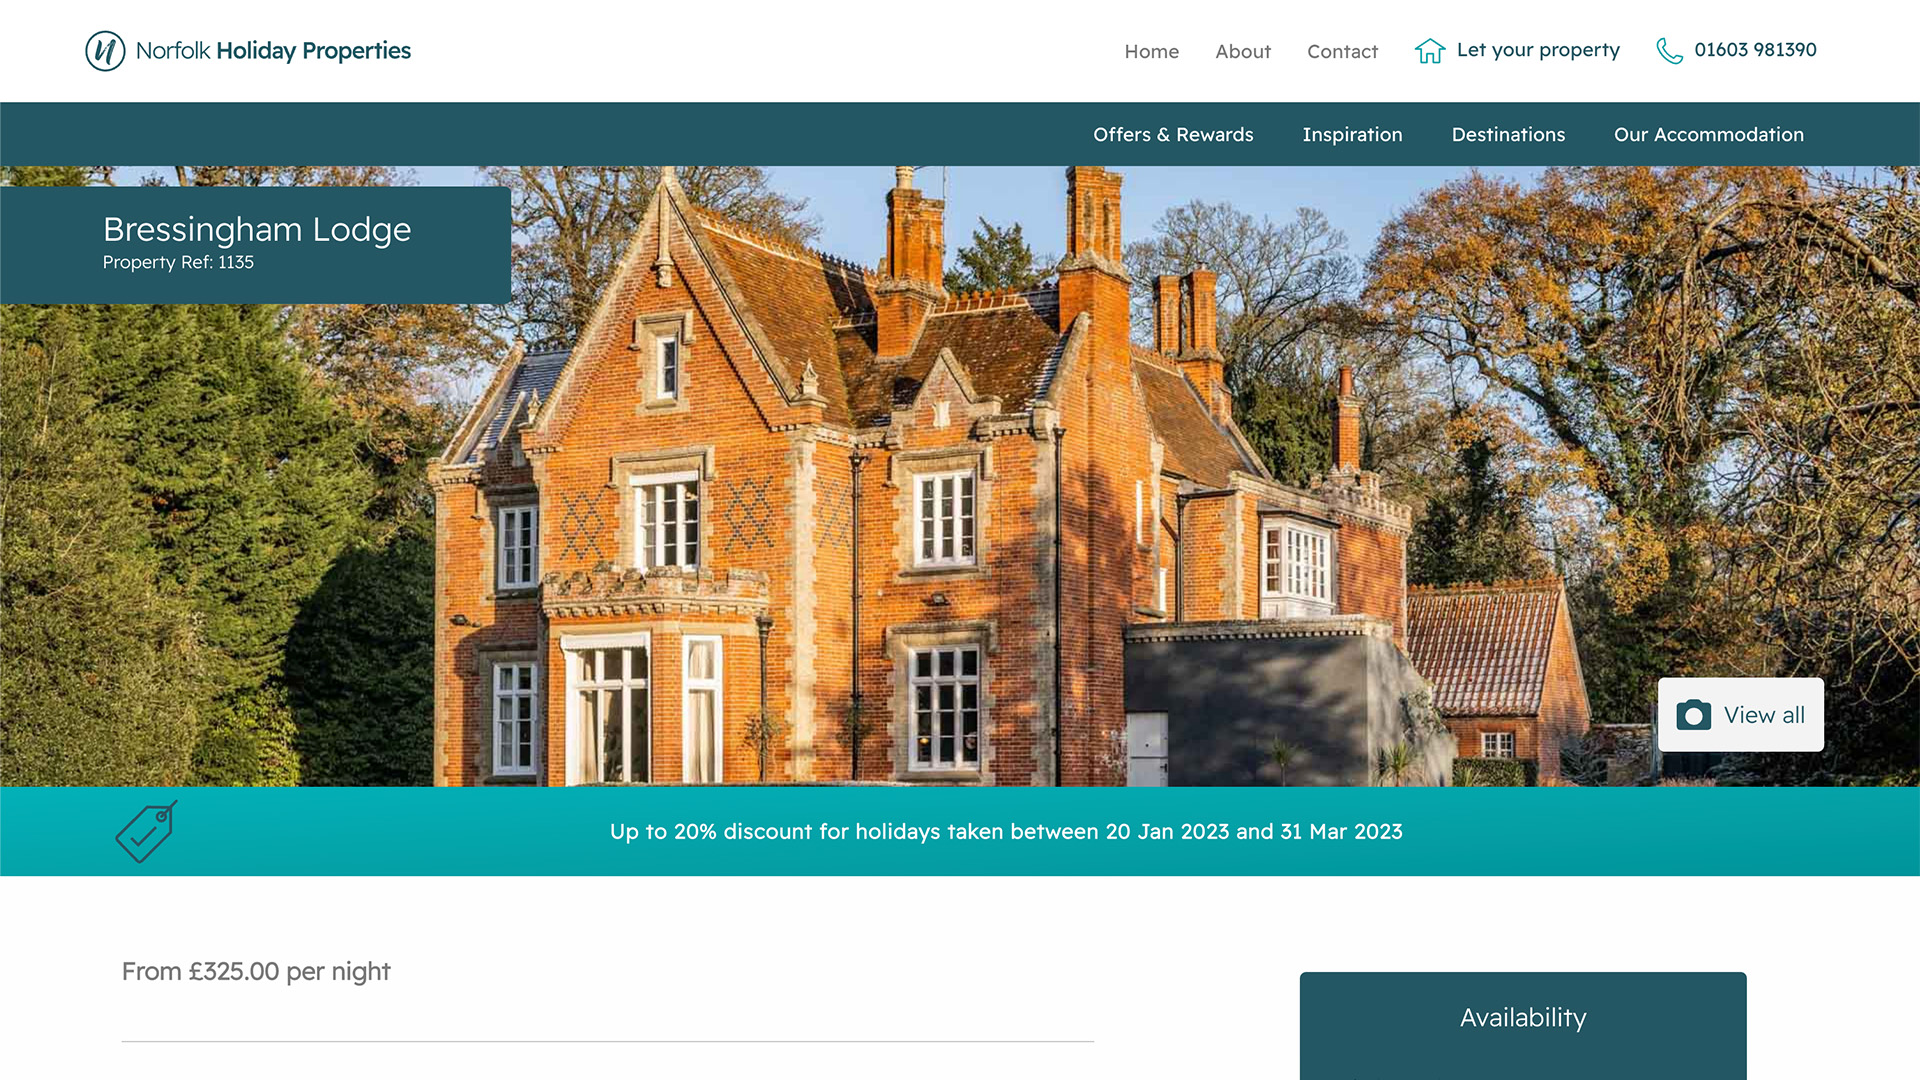 Norfolk Holiday Properties property page